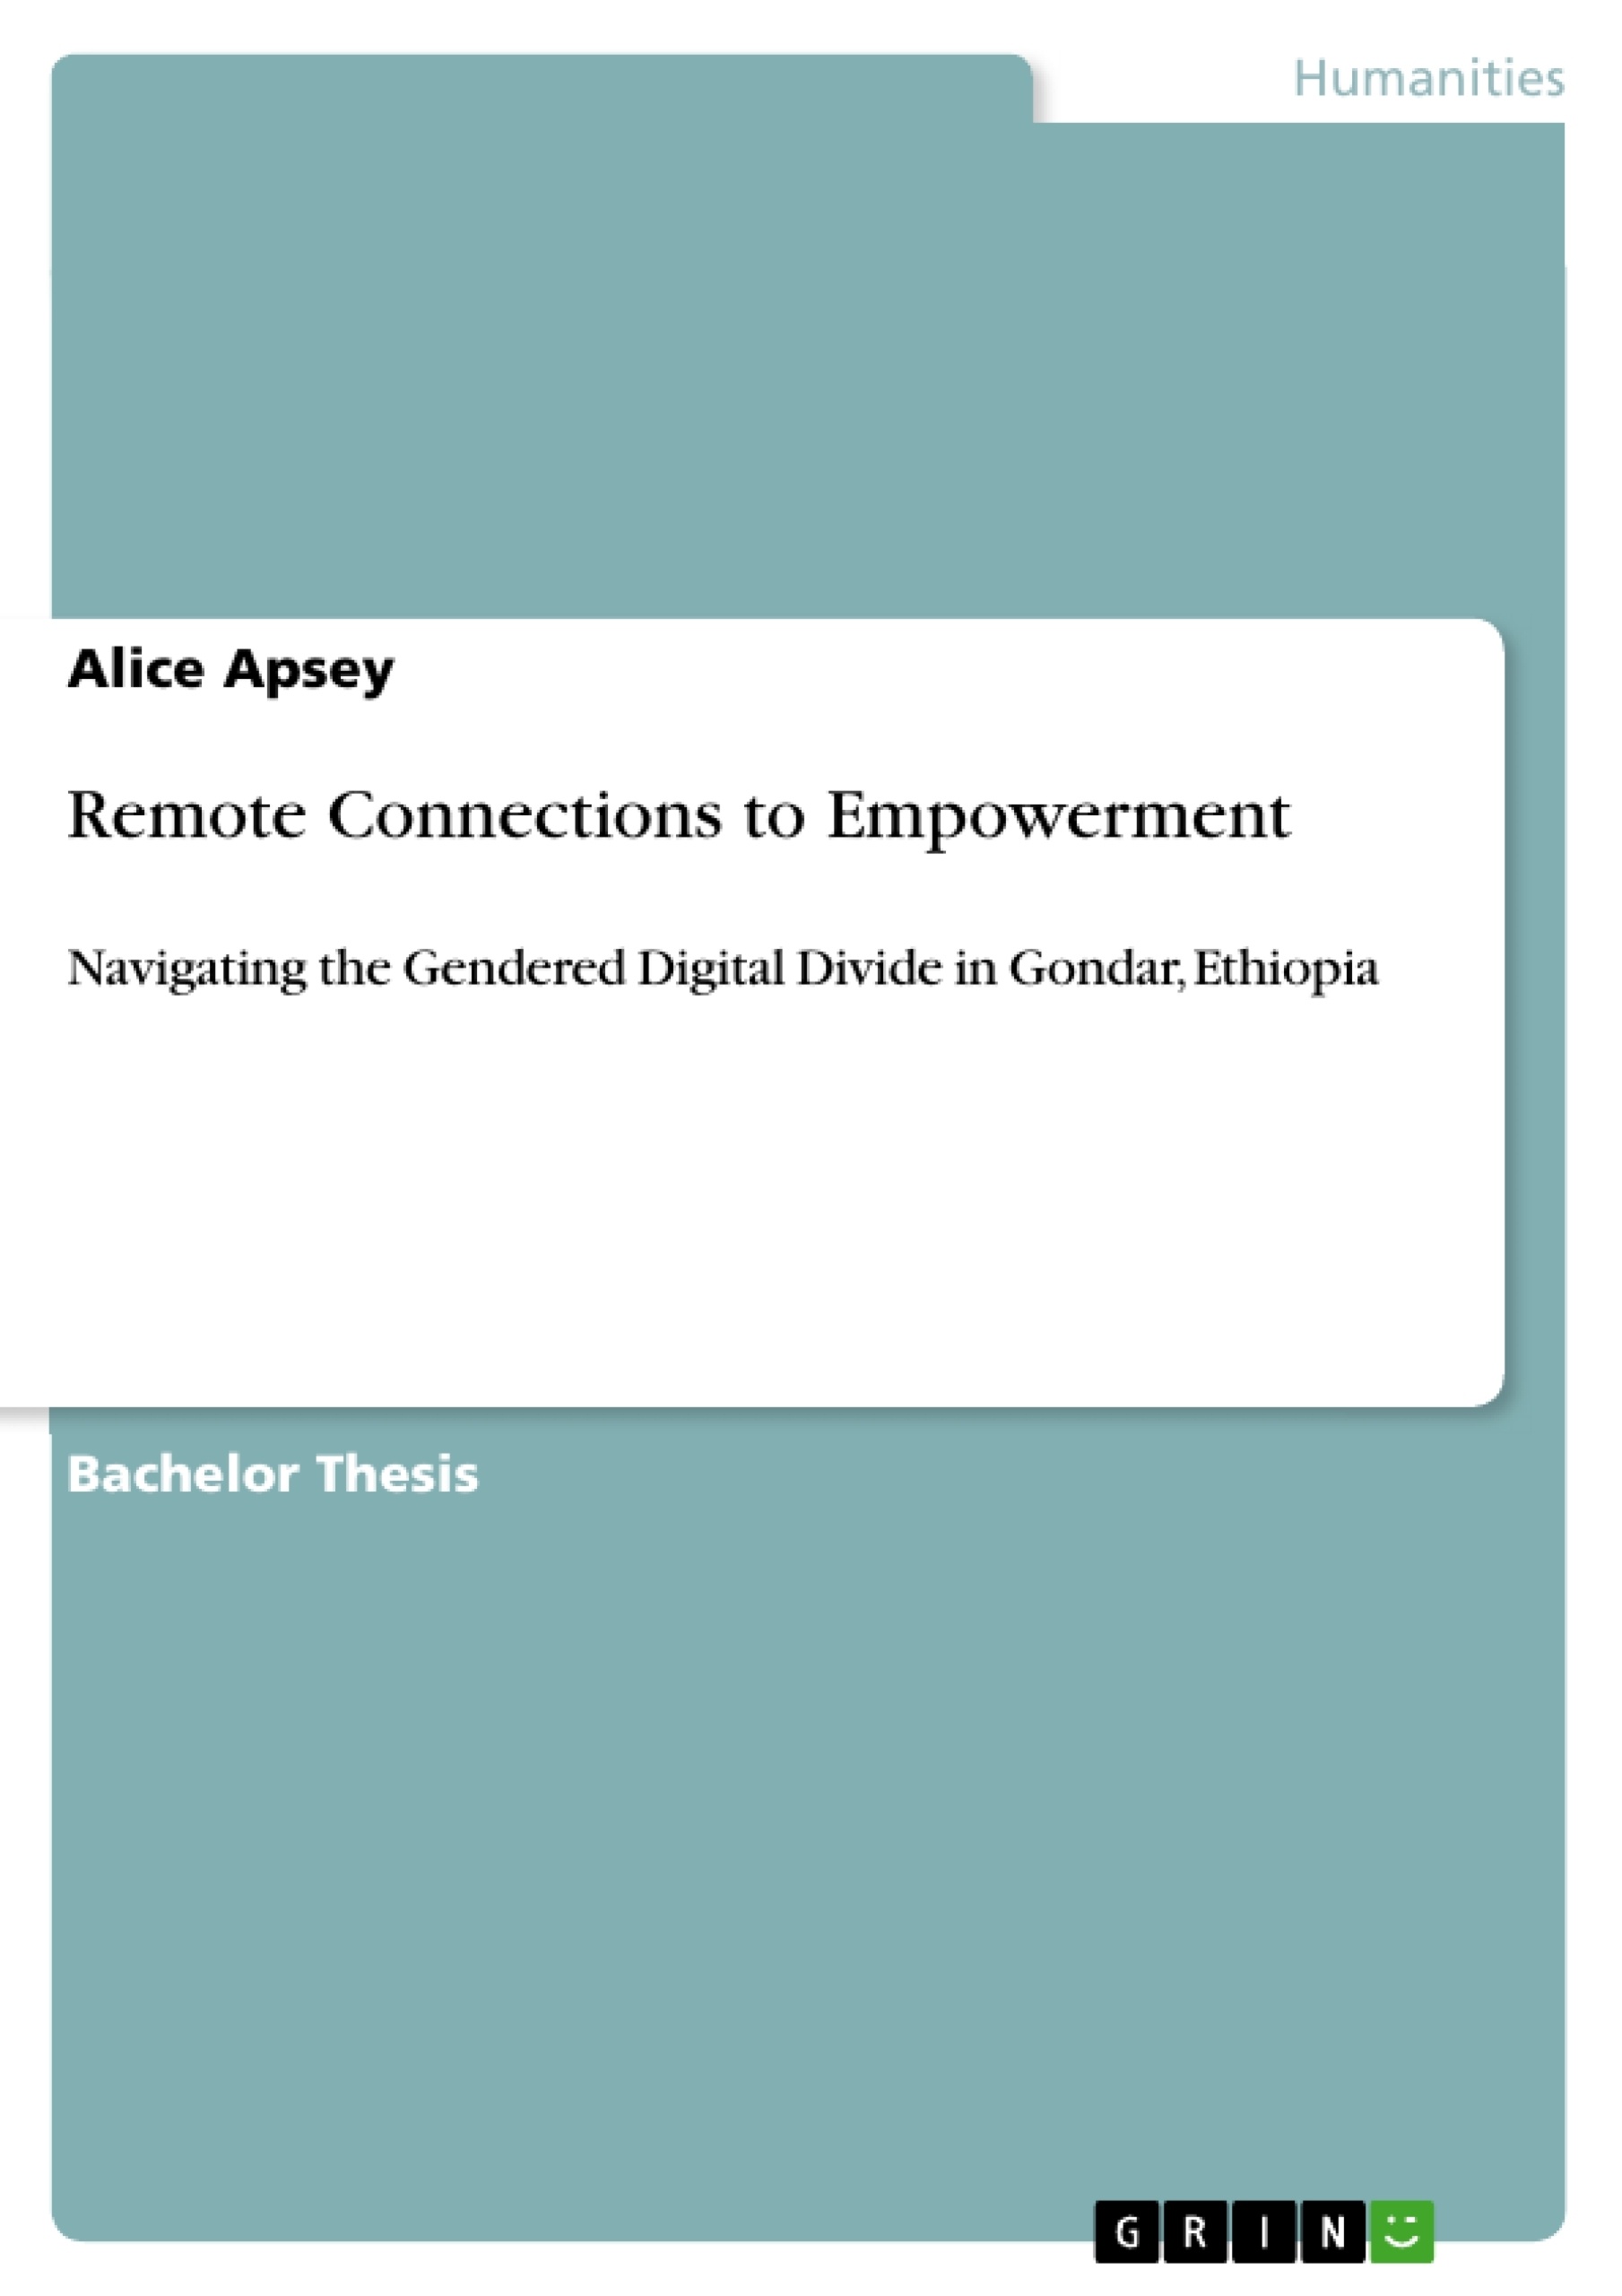 Title: Remote Connections to Empowerment